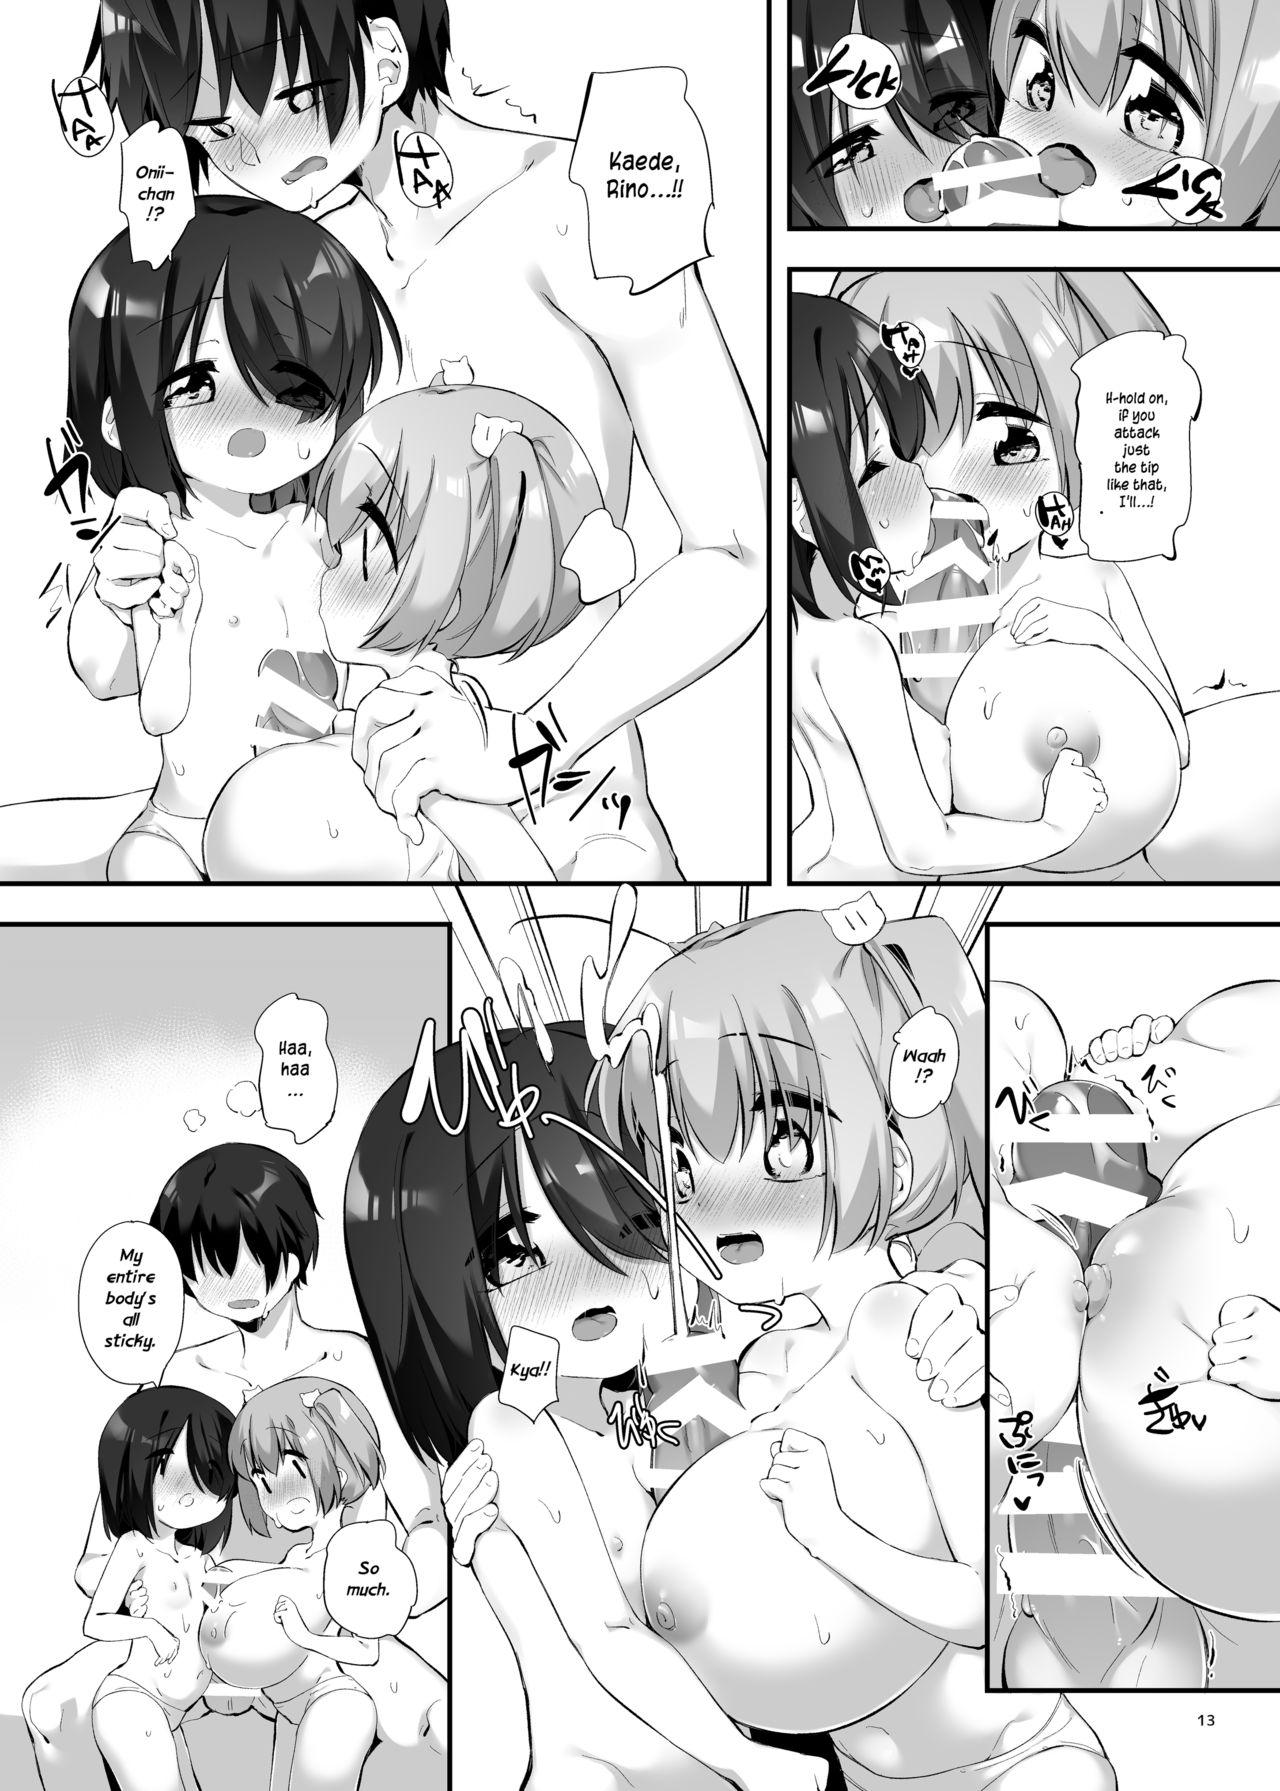 Rope Imouto ni Hasamarete Shiawase Desho? 3 | Between Sisters, Are You Happy? 3 - Original Free 18 Year Old Porn - Page 12